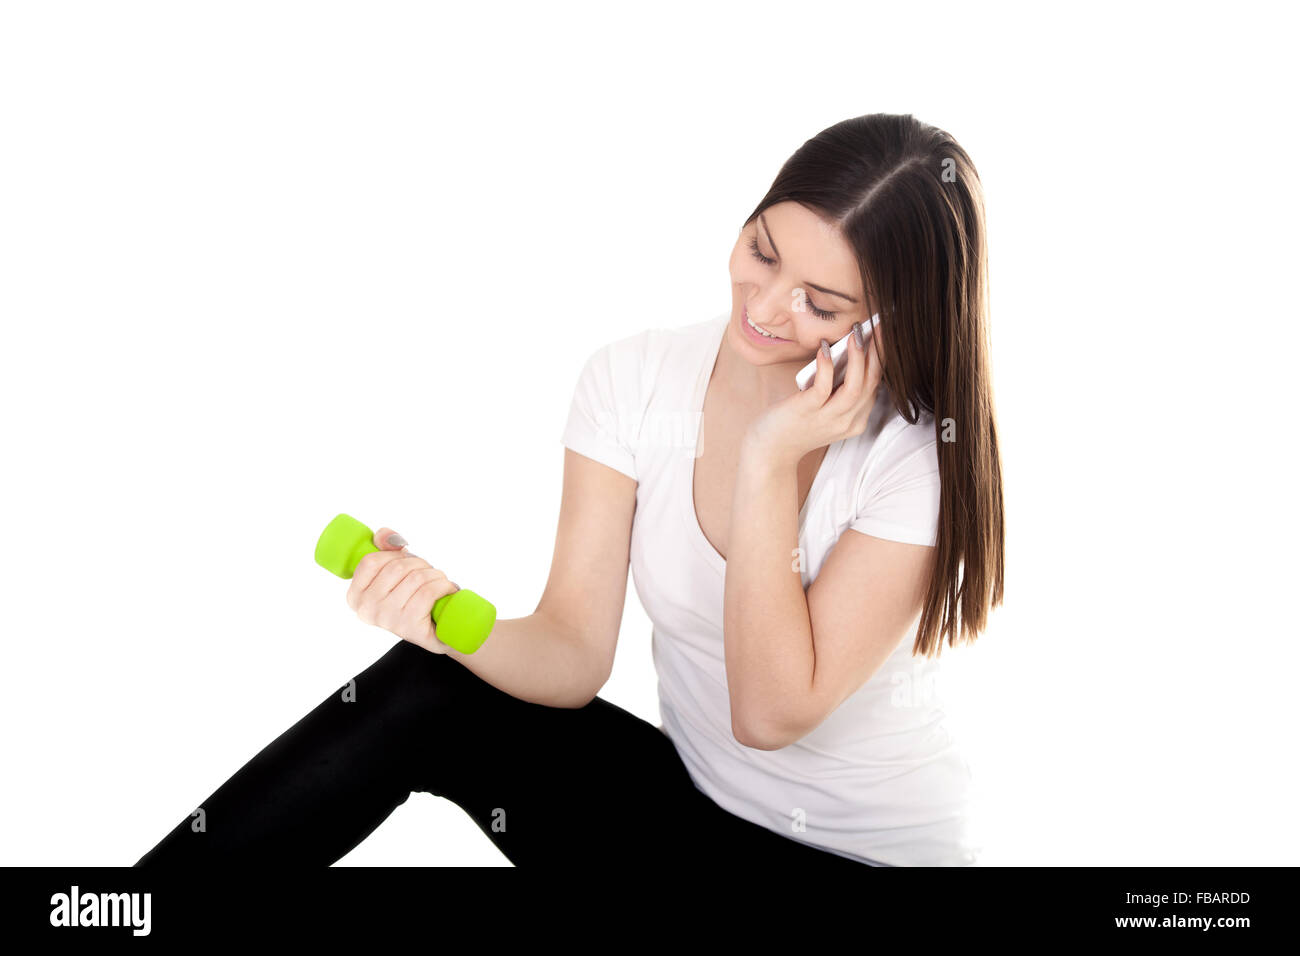 Young smiling teenage girl making call with smartphone, talking on the mobile phone and lifting dumbbell weights, doing biceps c Stock Photo